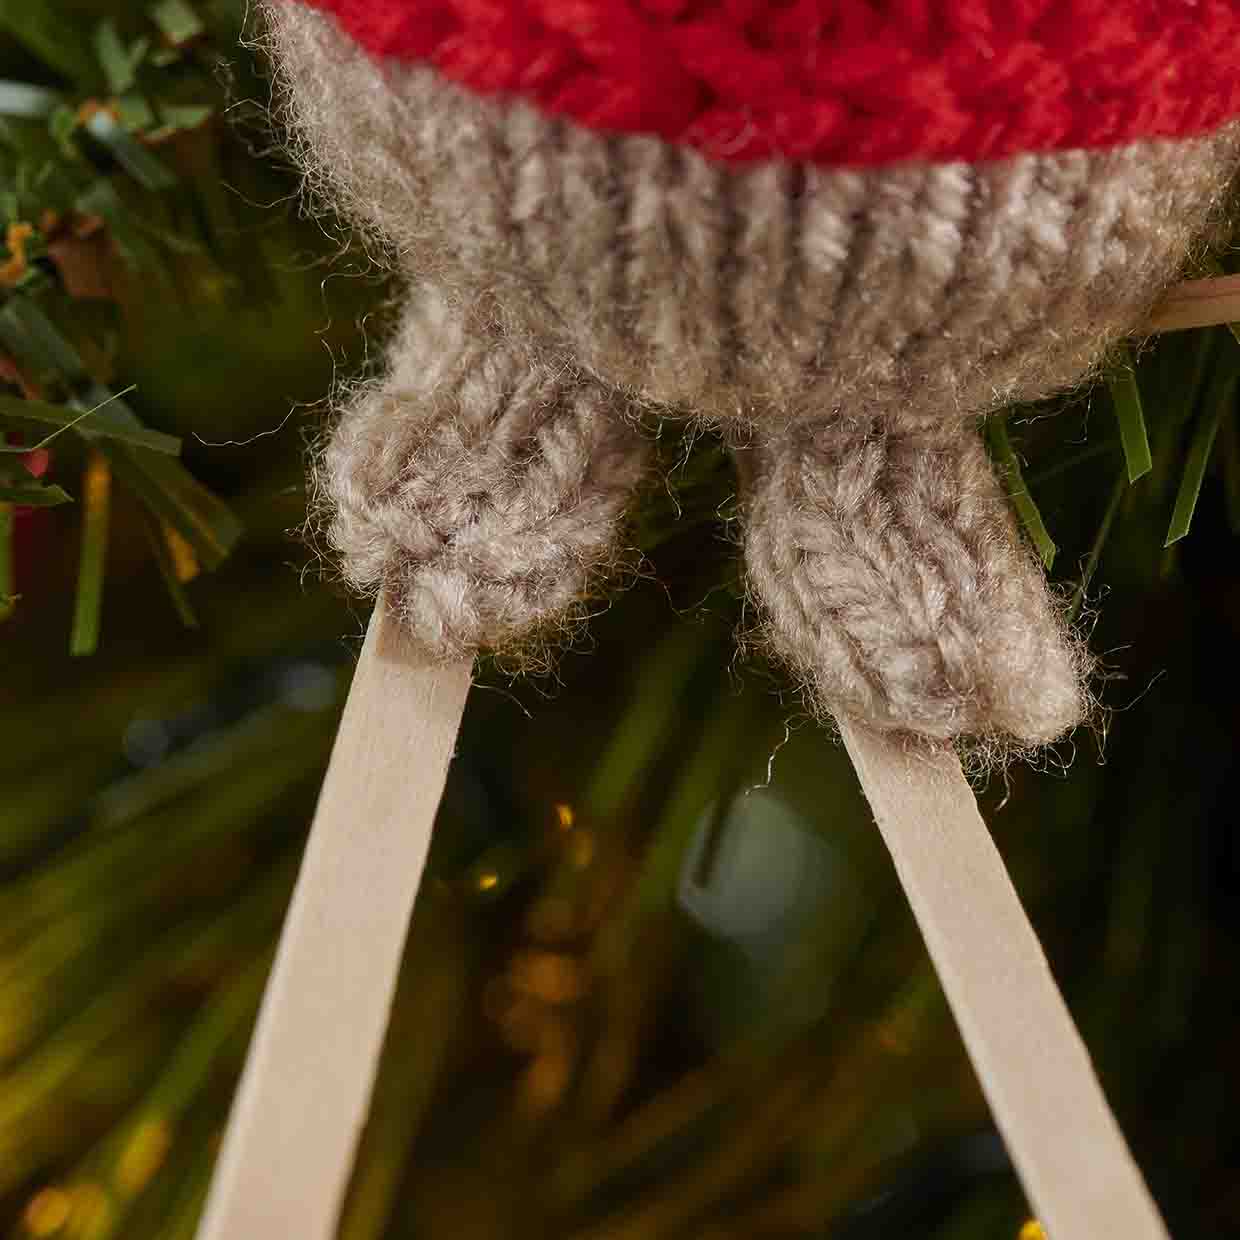 Close up of two knitted blobby pale brown feet glued on to two wooden coffee stirrers